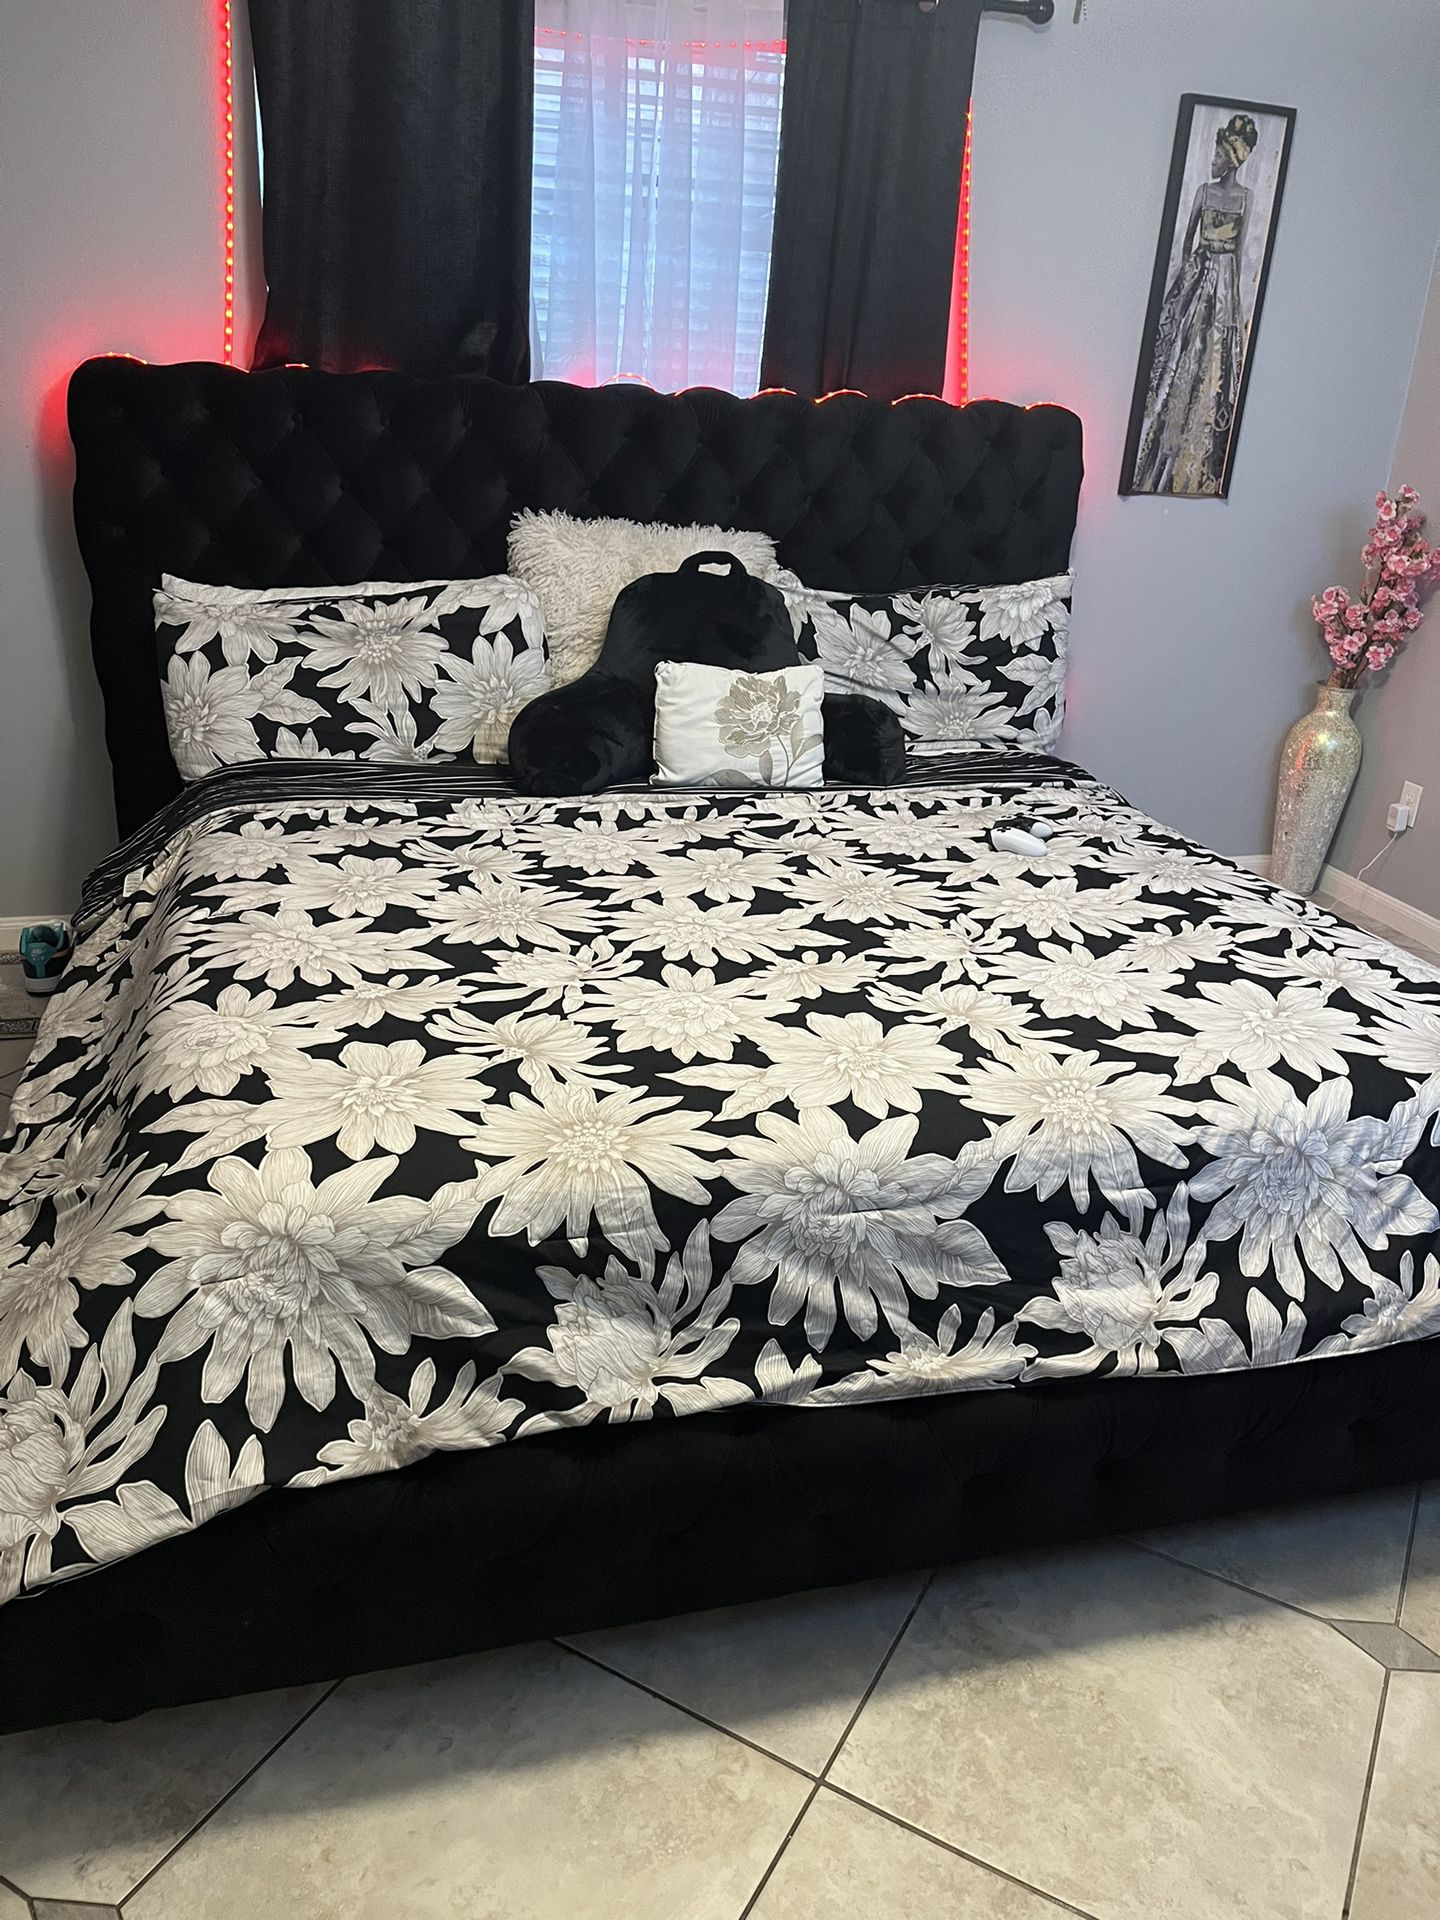 King Bed With Matress And Frame Togheter